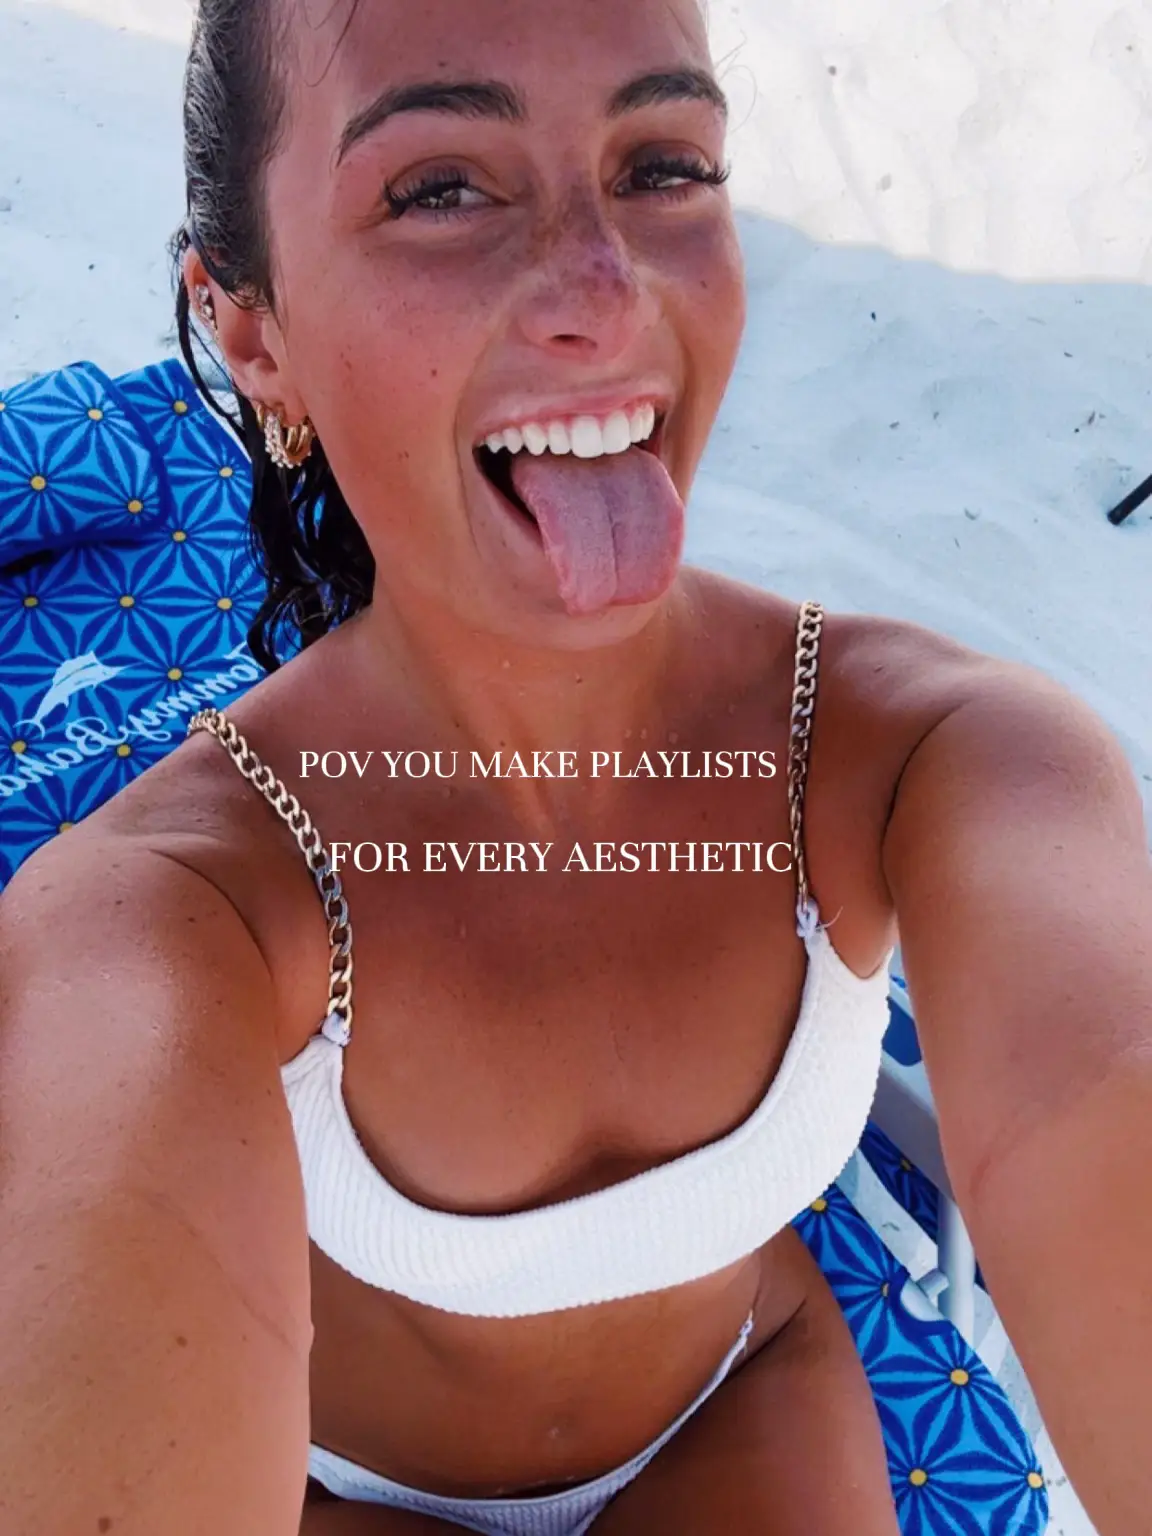  A woman in a white bikini is making a playlist for every aesthetic.